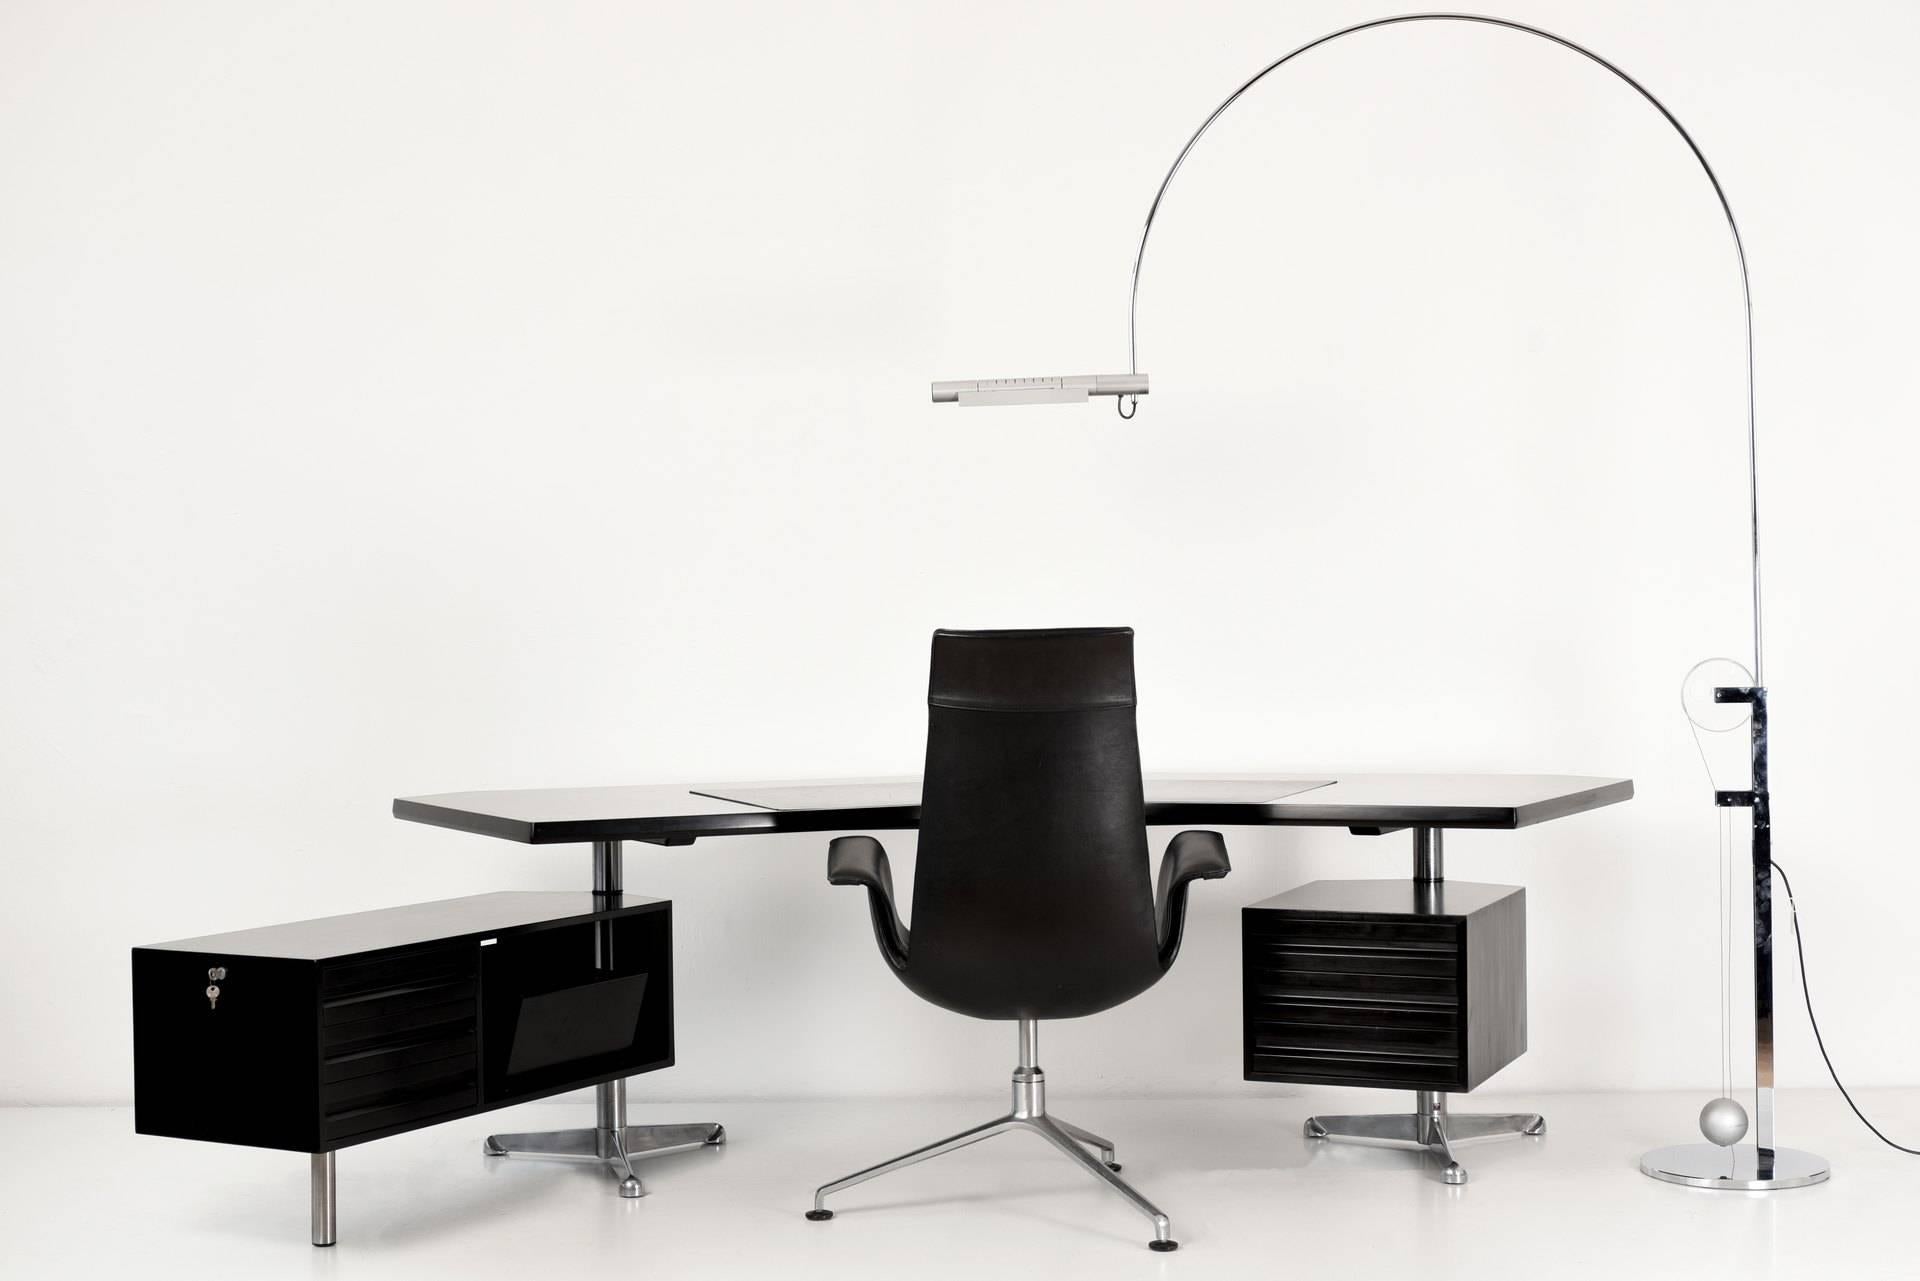 The T 96 by Osvaldo Borsani in 1956 was the most striking and completely new. The curved shape of the plate with the pivoting boxes made the desk extremely easy to use. The finely matte surface with the leather-based writing board has an elegant and